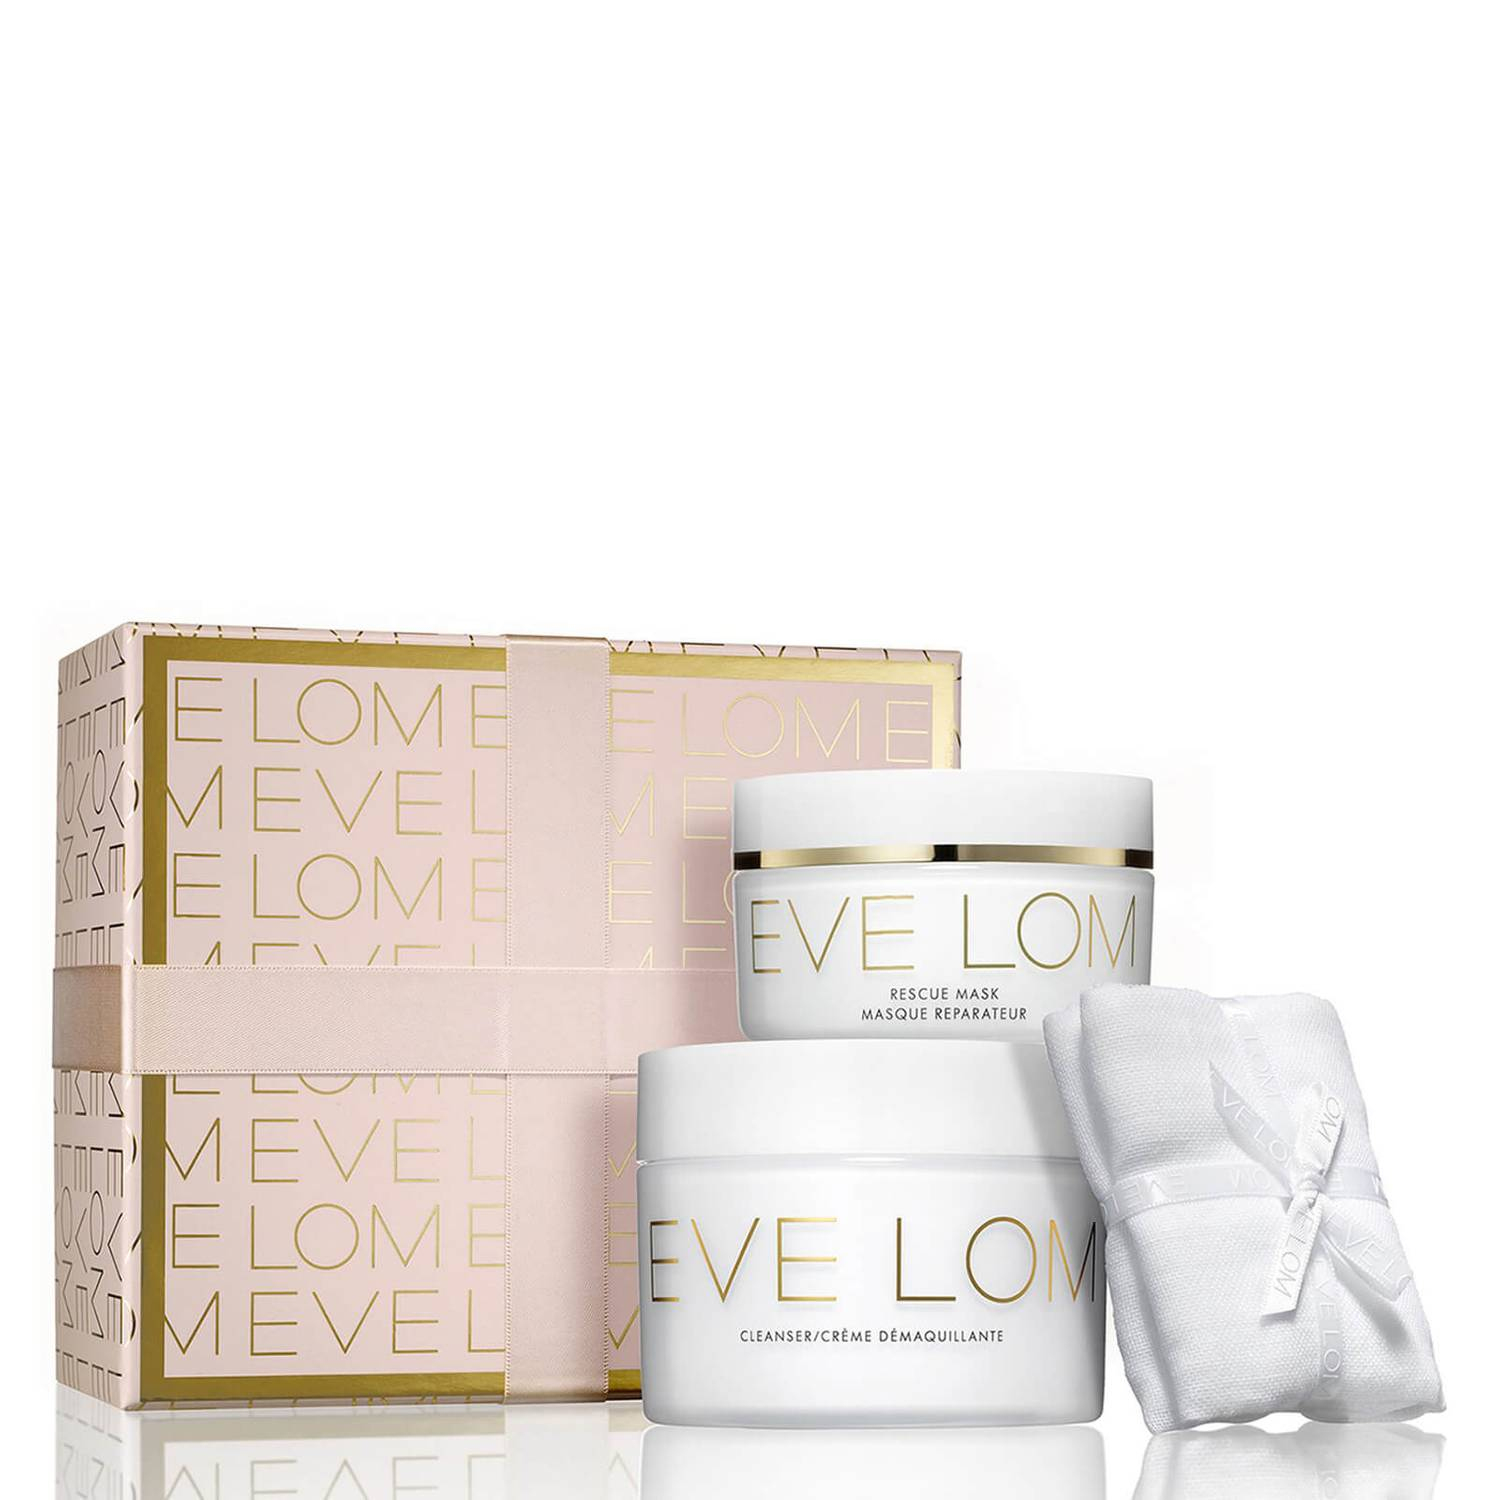 Eve Lom Deluxe Rescue Ritual Gift Set 300Ml (Worth $232.00 pour Eve Lom Gift Sets 